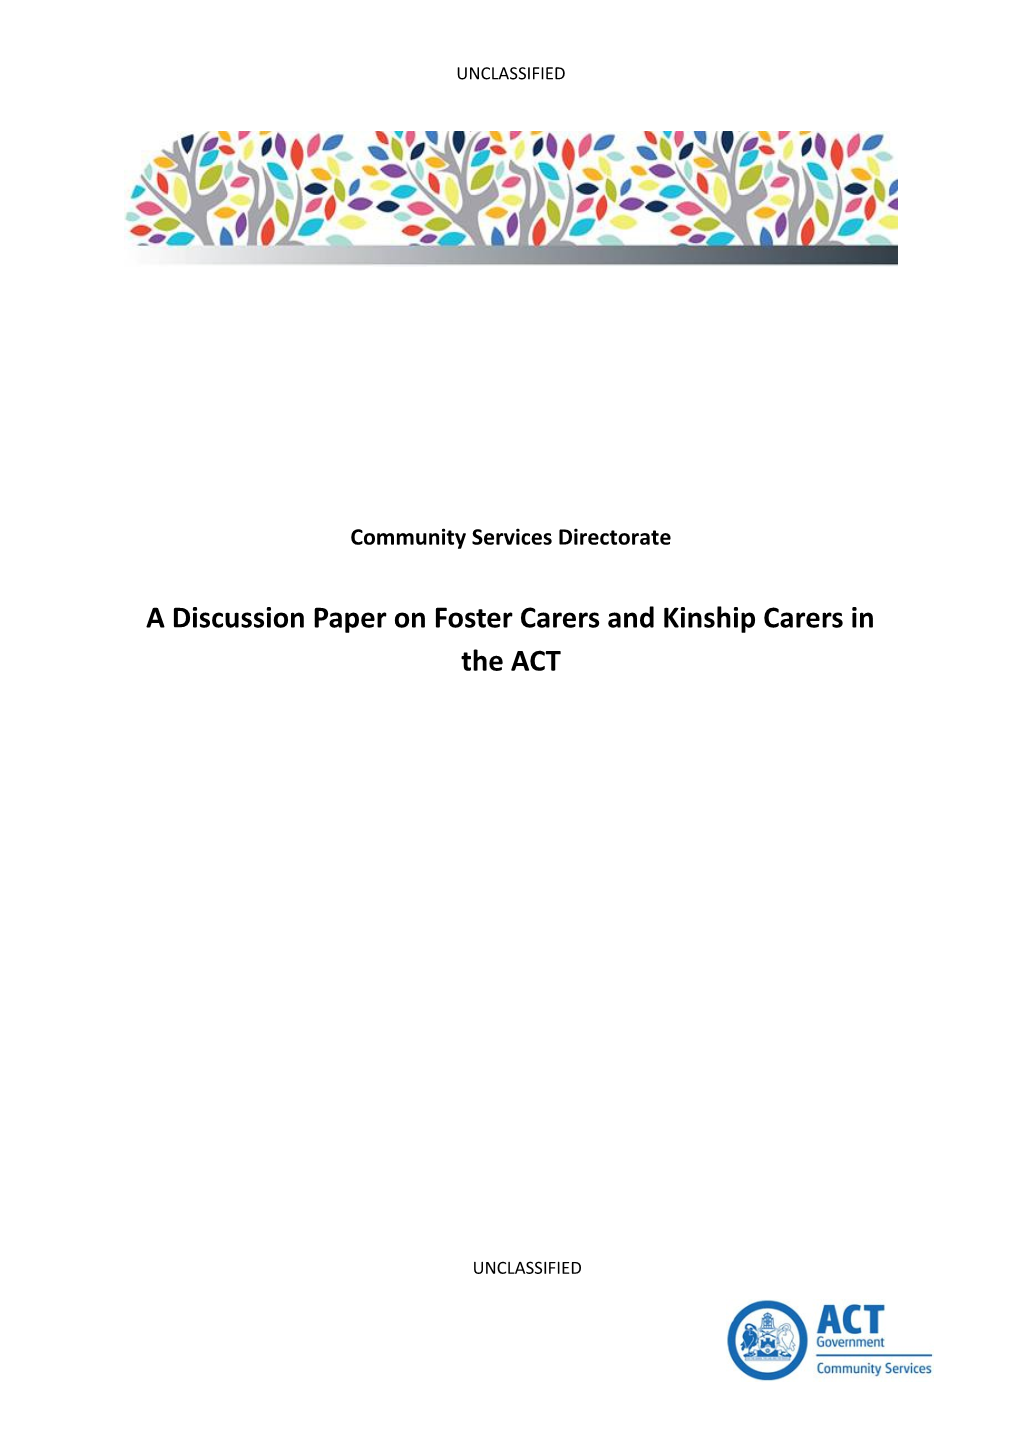 A Discussion Paper on Foster Carers and Kinship Carers in the ACT